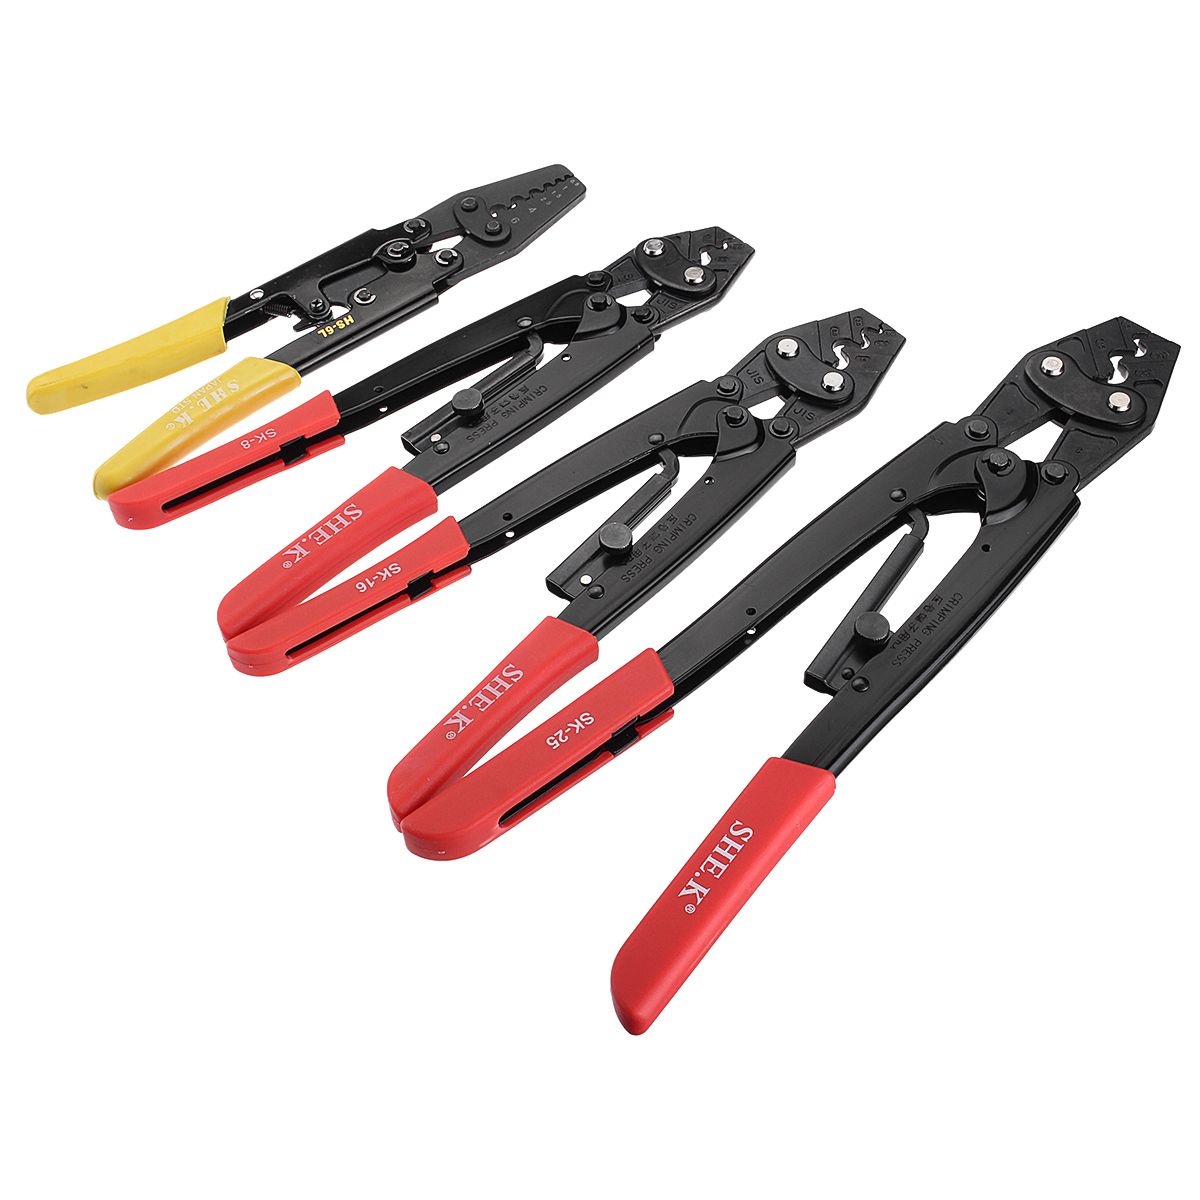 05-25mmsup2-Ratchet-Crimper-Cable-Wire-Cutter-Terminal-Crimping-Plier-4-Size-1351708